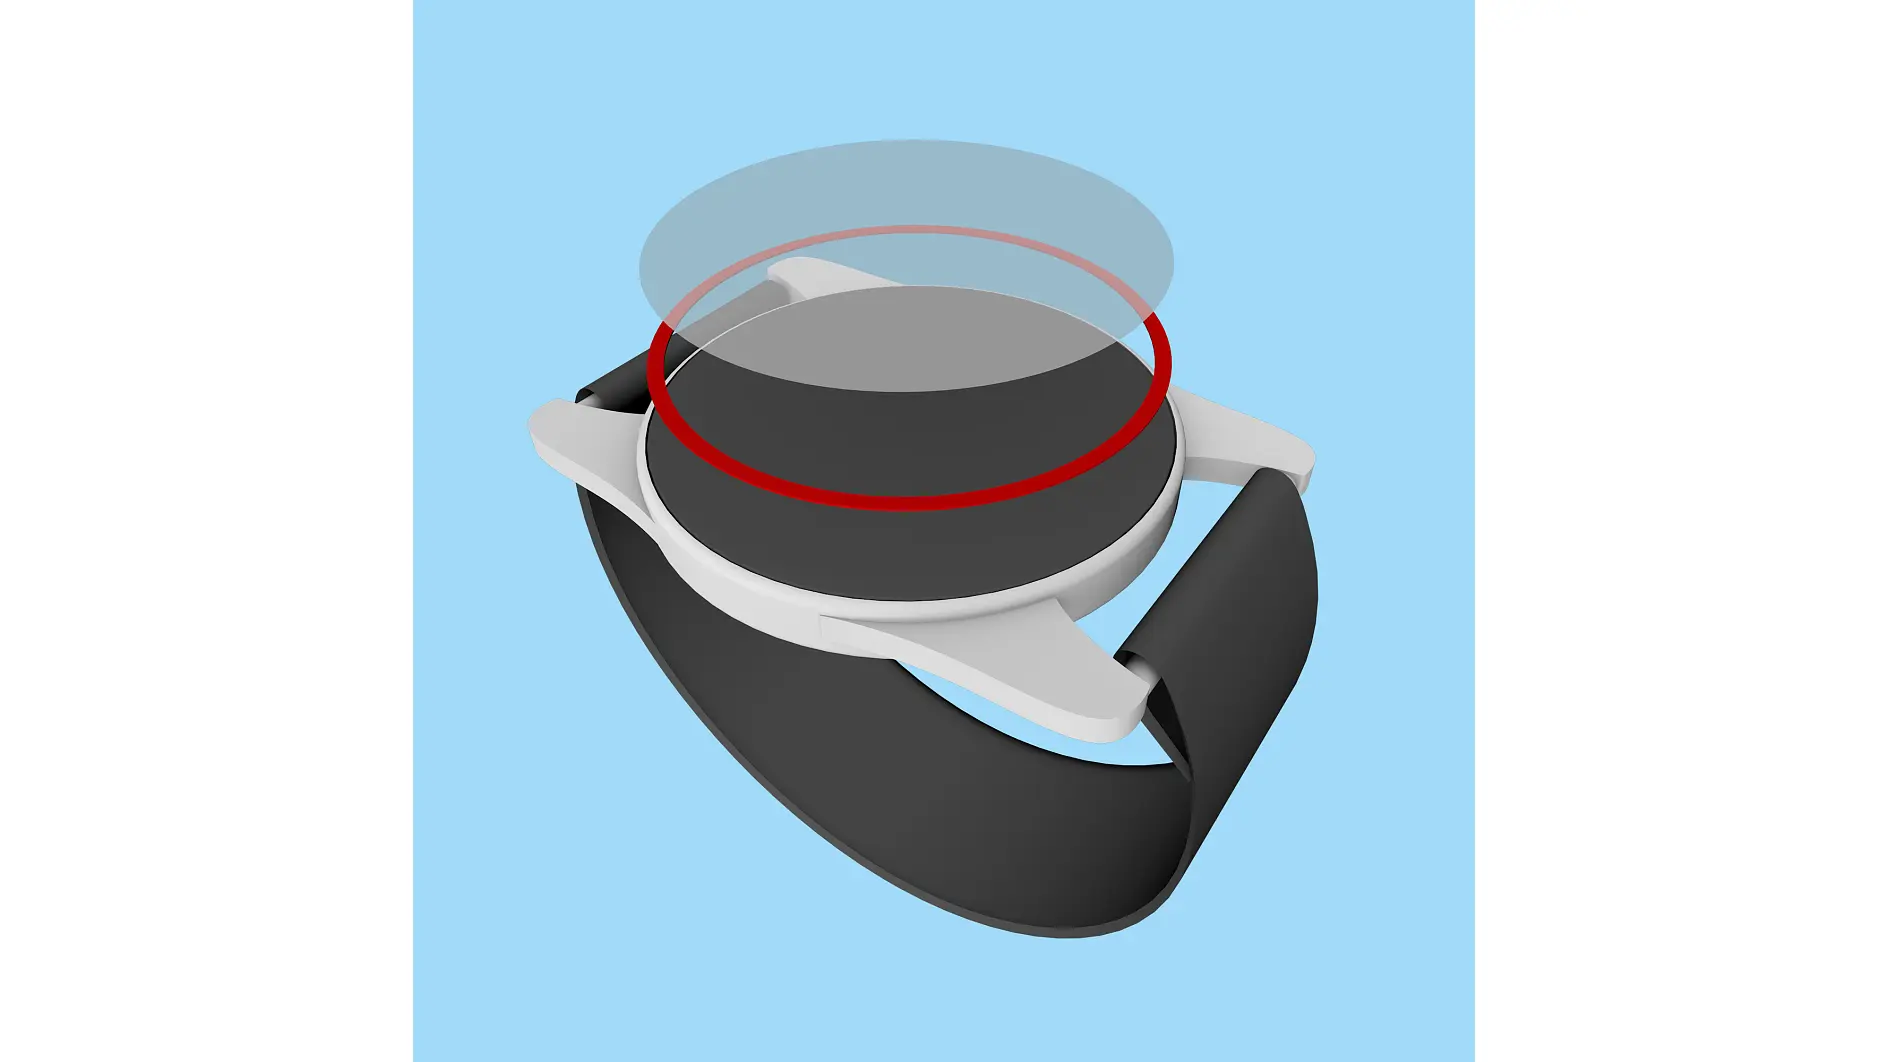 The cover (the lens) of a smartwatch must be bonded to the housing with the utmost precision during the manufacturing process. The tape (red) has to meet a wide range of requirements, providing high adhesive strength, shock resistance, and resistance to chemical substances.